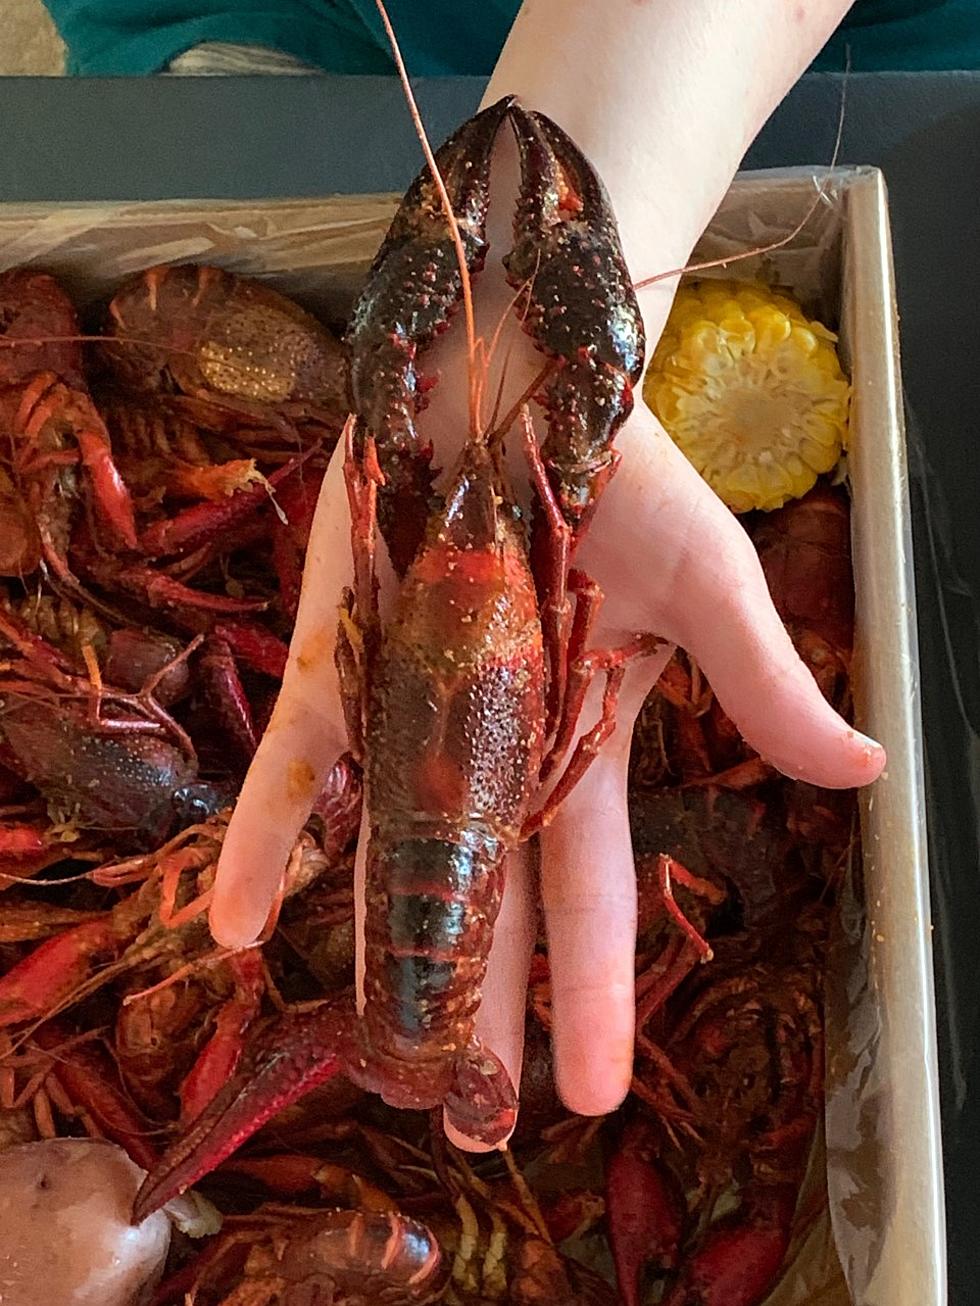 How Much Are Crawfish in Shreveport This Week?